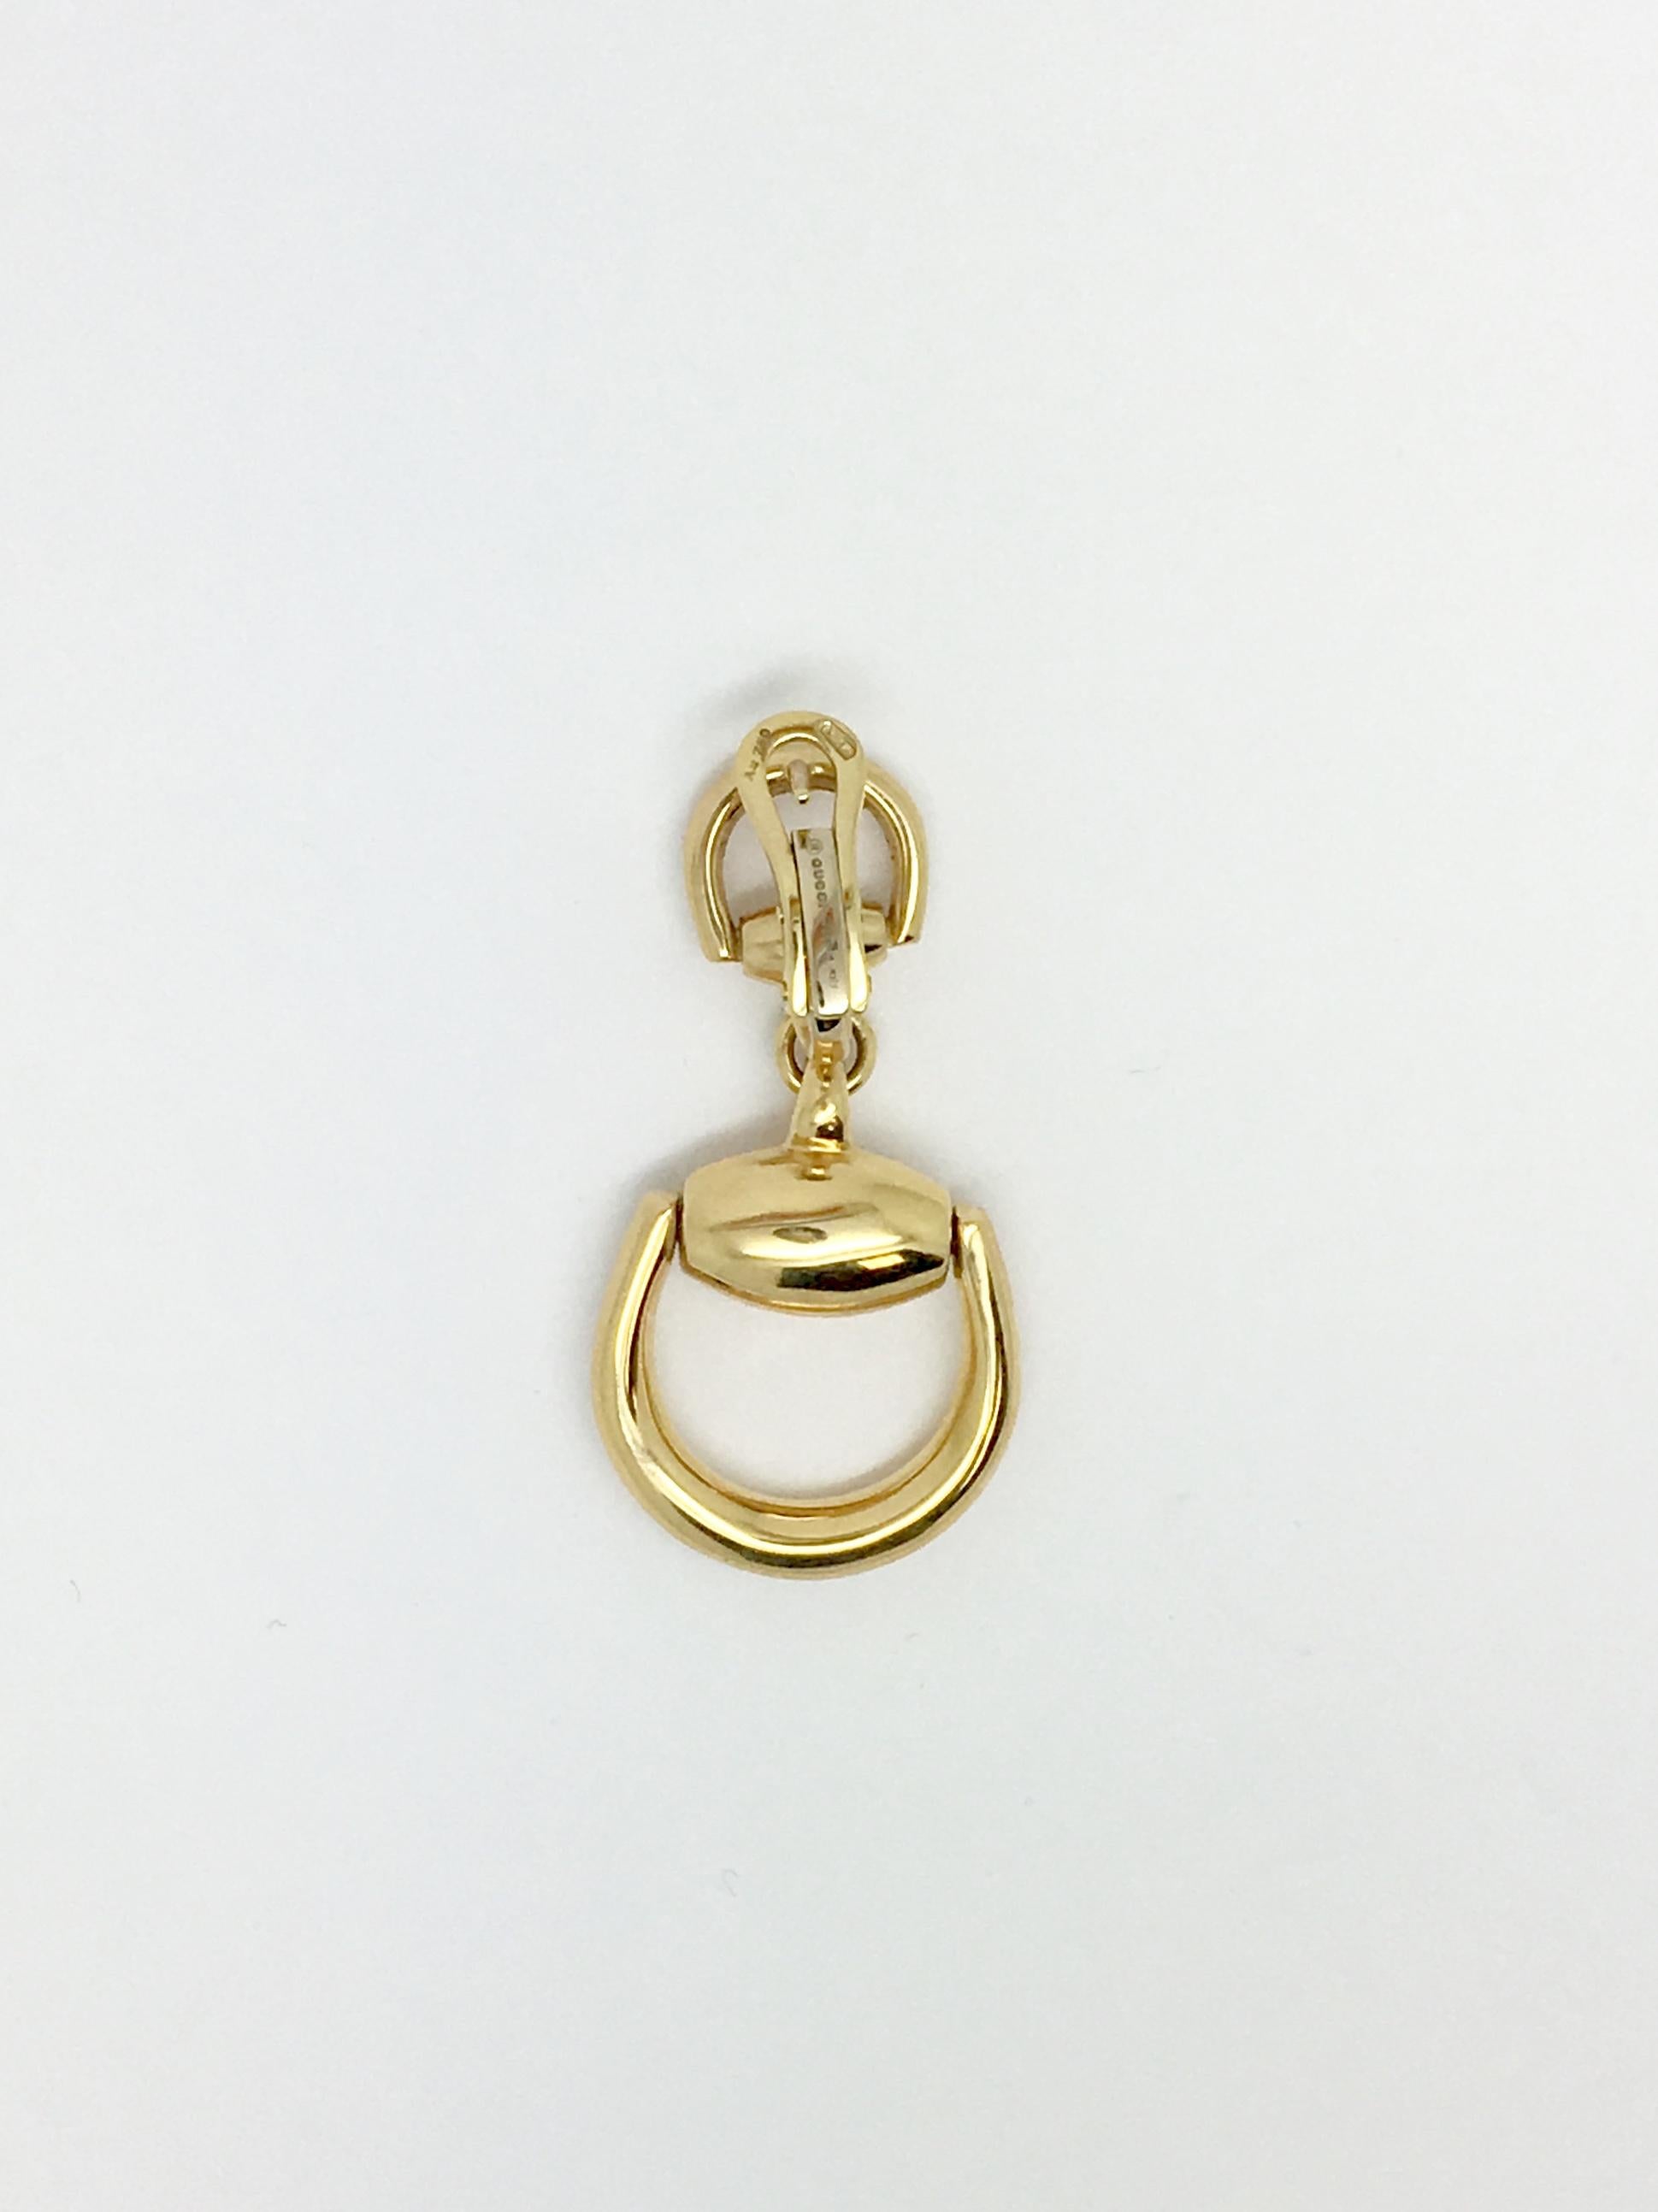 GUCCI horsebit 18 karat yellow gold drop dangle earrings. These earrings are for pierced ears and have an omega style backing that is very comfortable and secure to wear.